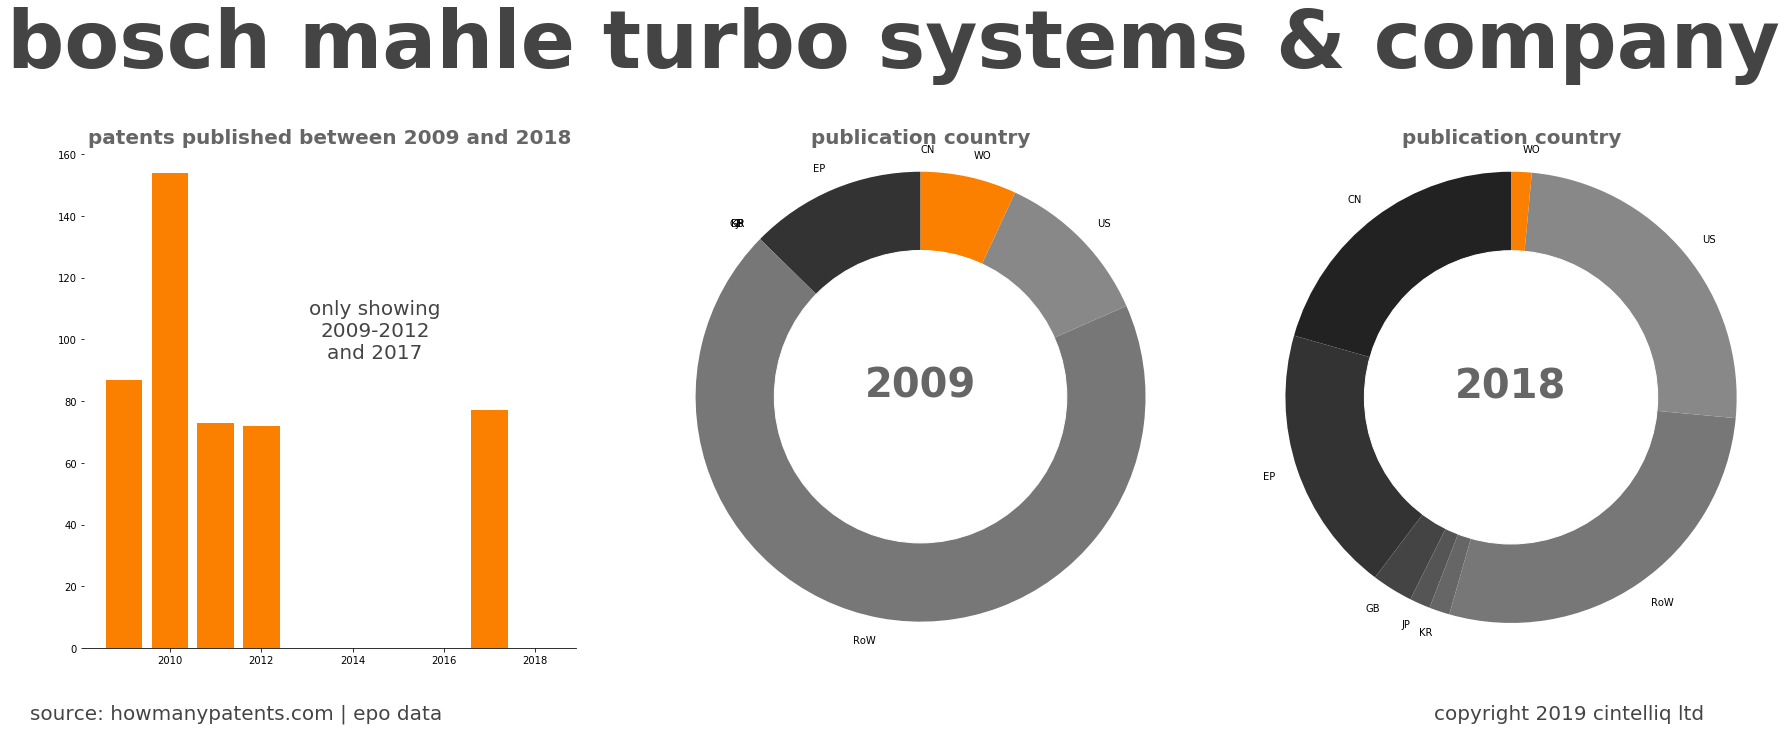 summary of patents for Bosch Mahle Turbo Systems & Company